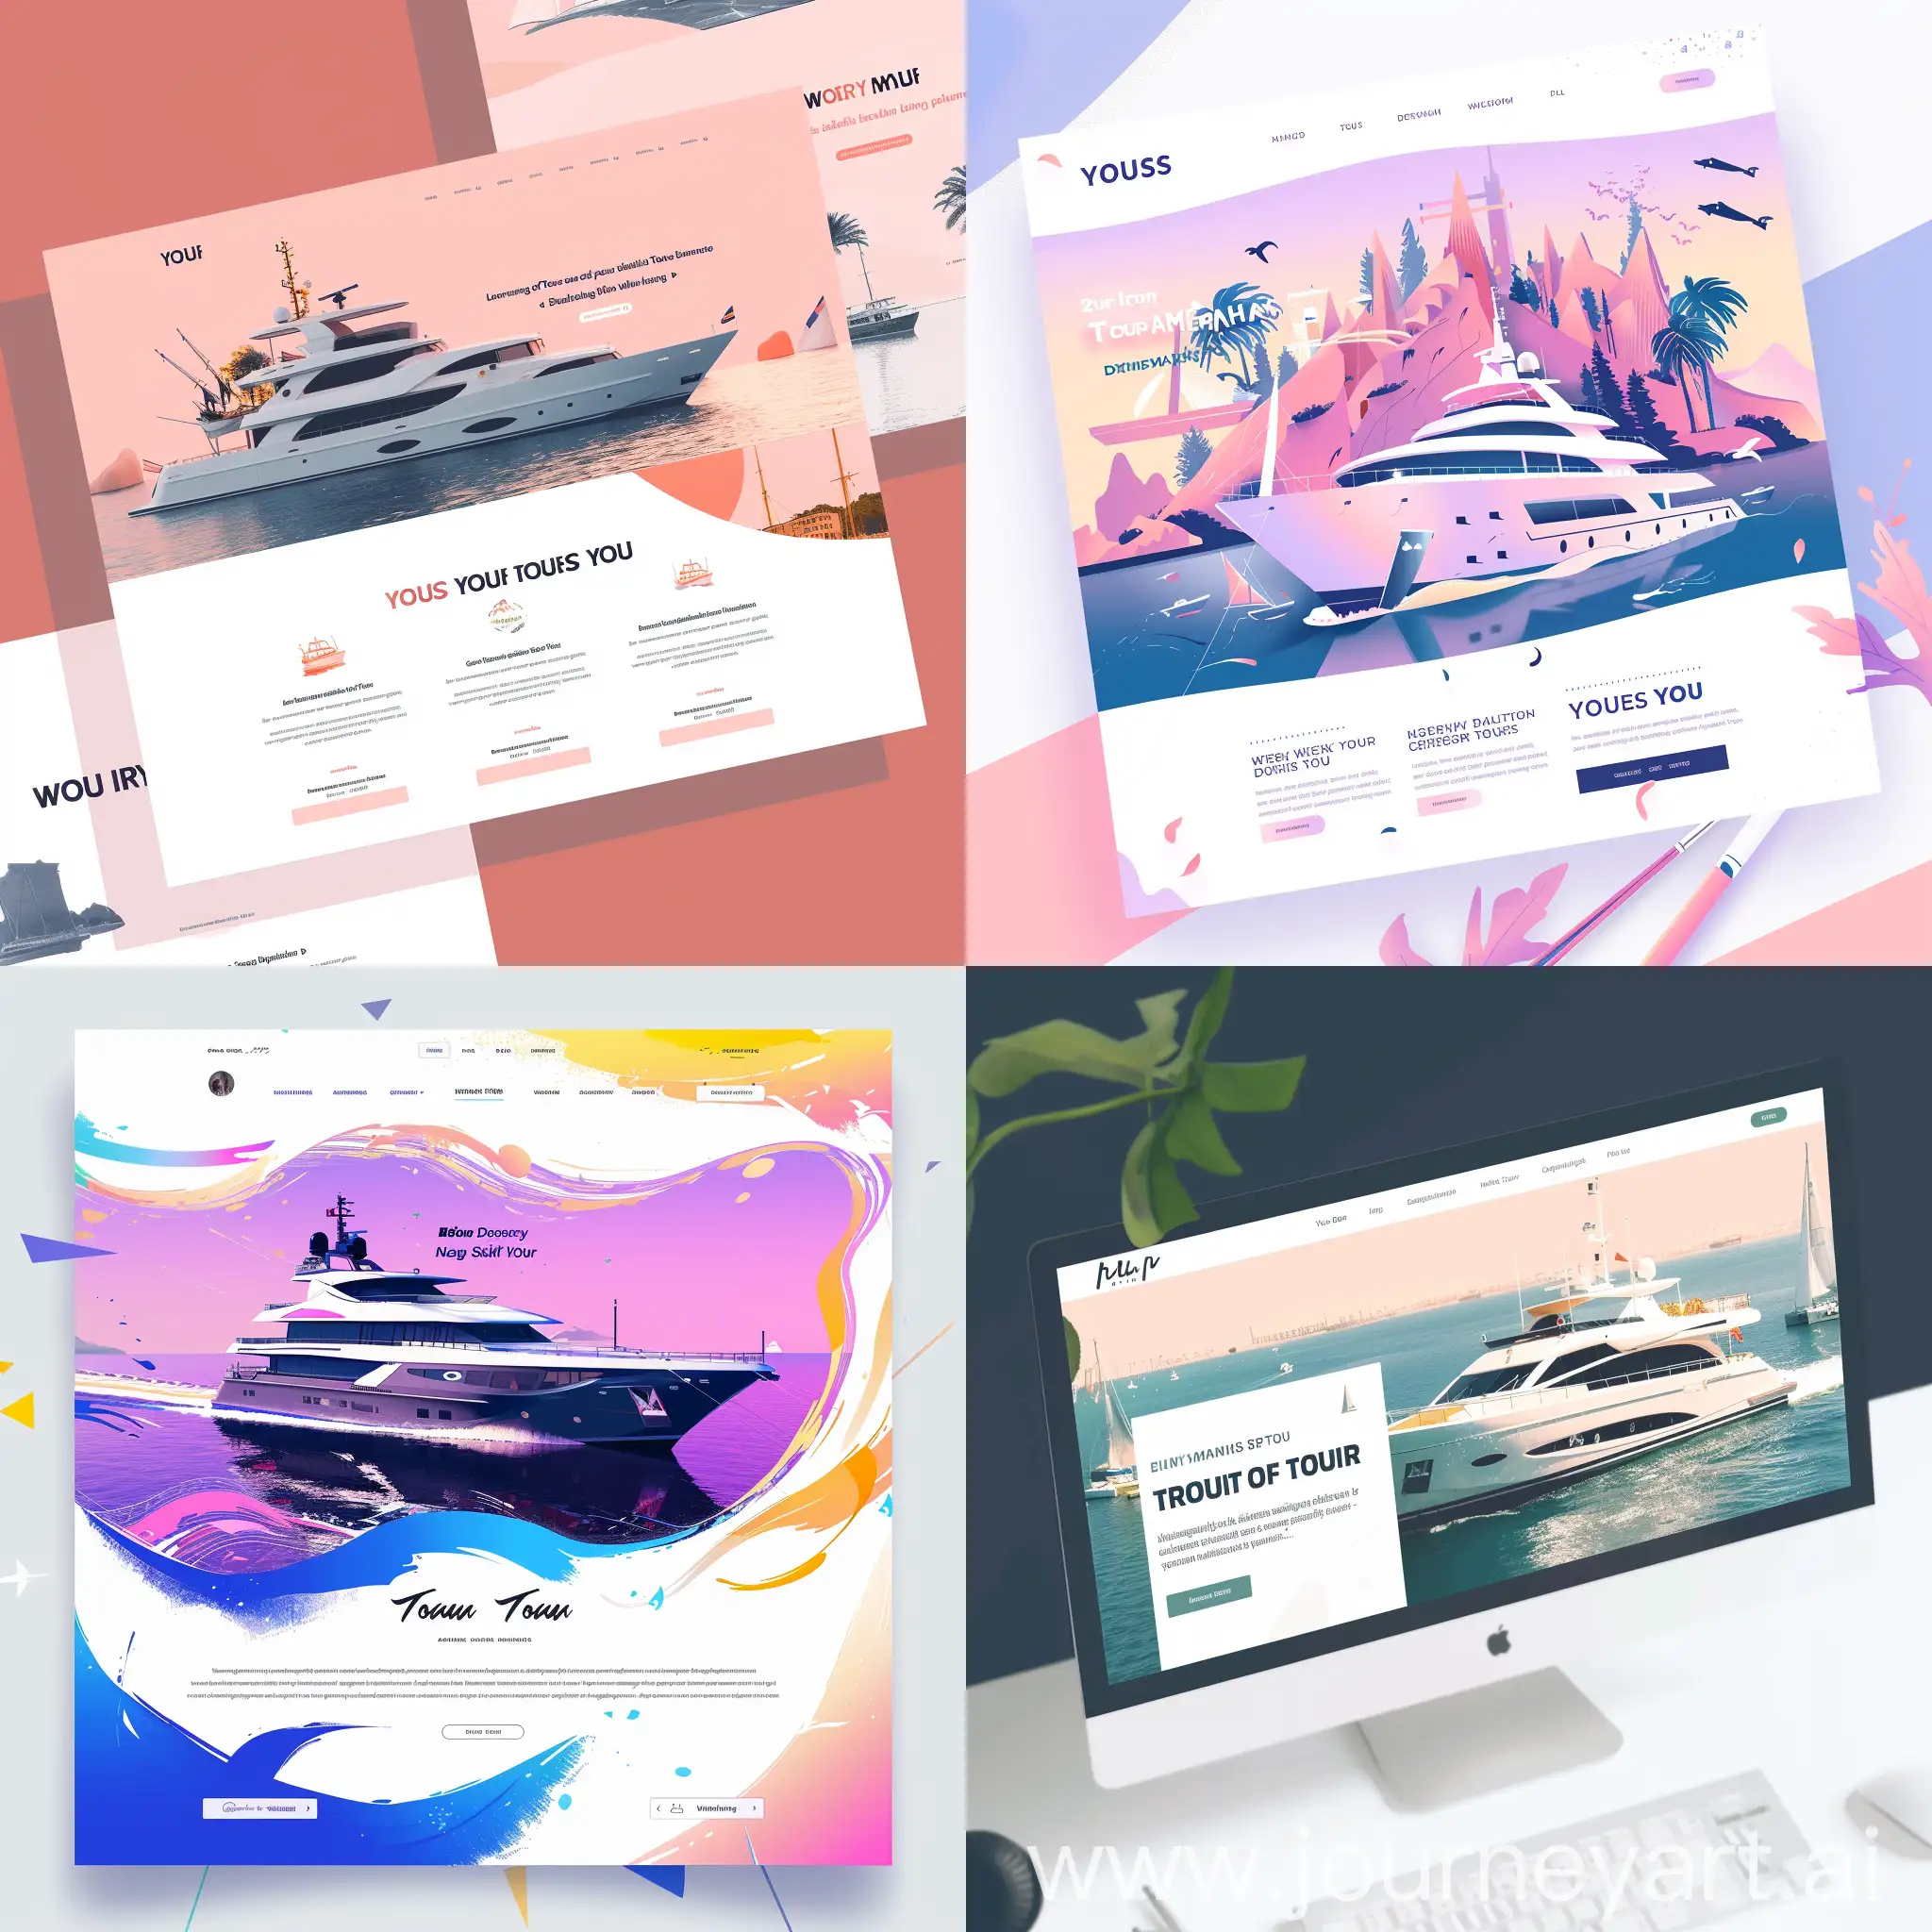 You - high skill specialist in web development and in a modern web design.
paint for me a modern designed landing page for a yacht tour firm with using 2D animations